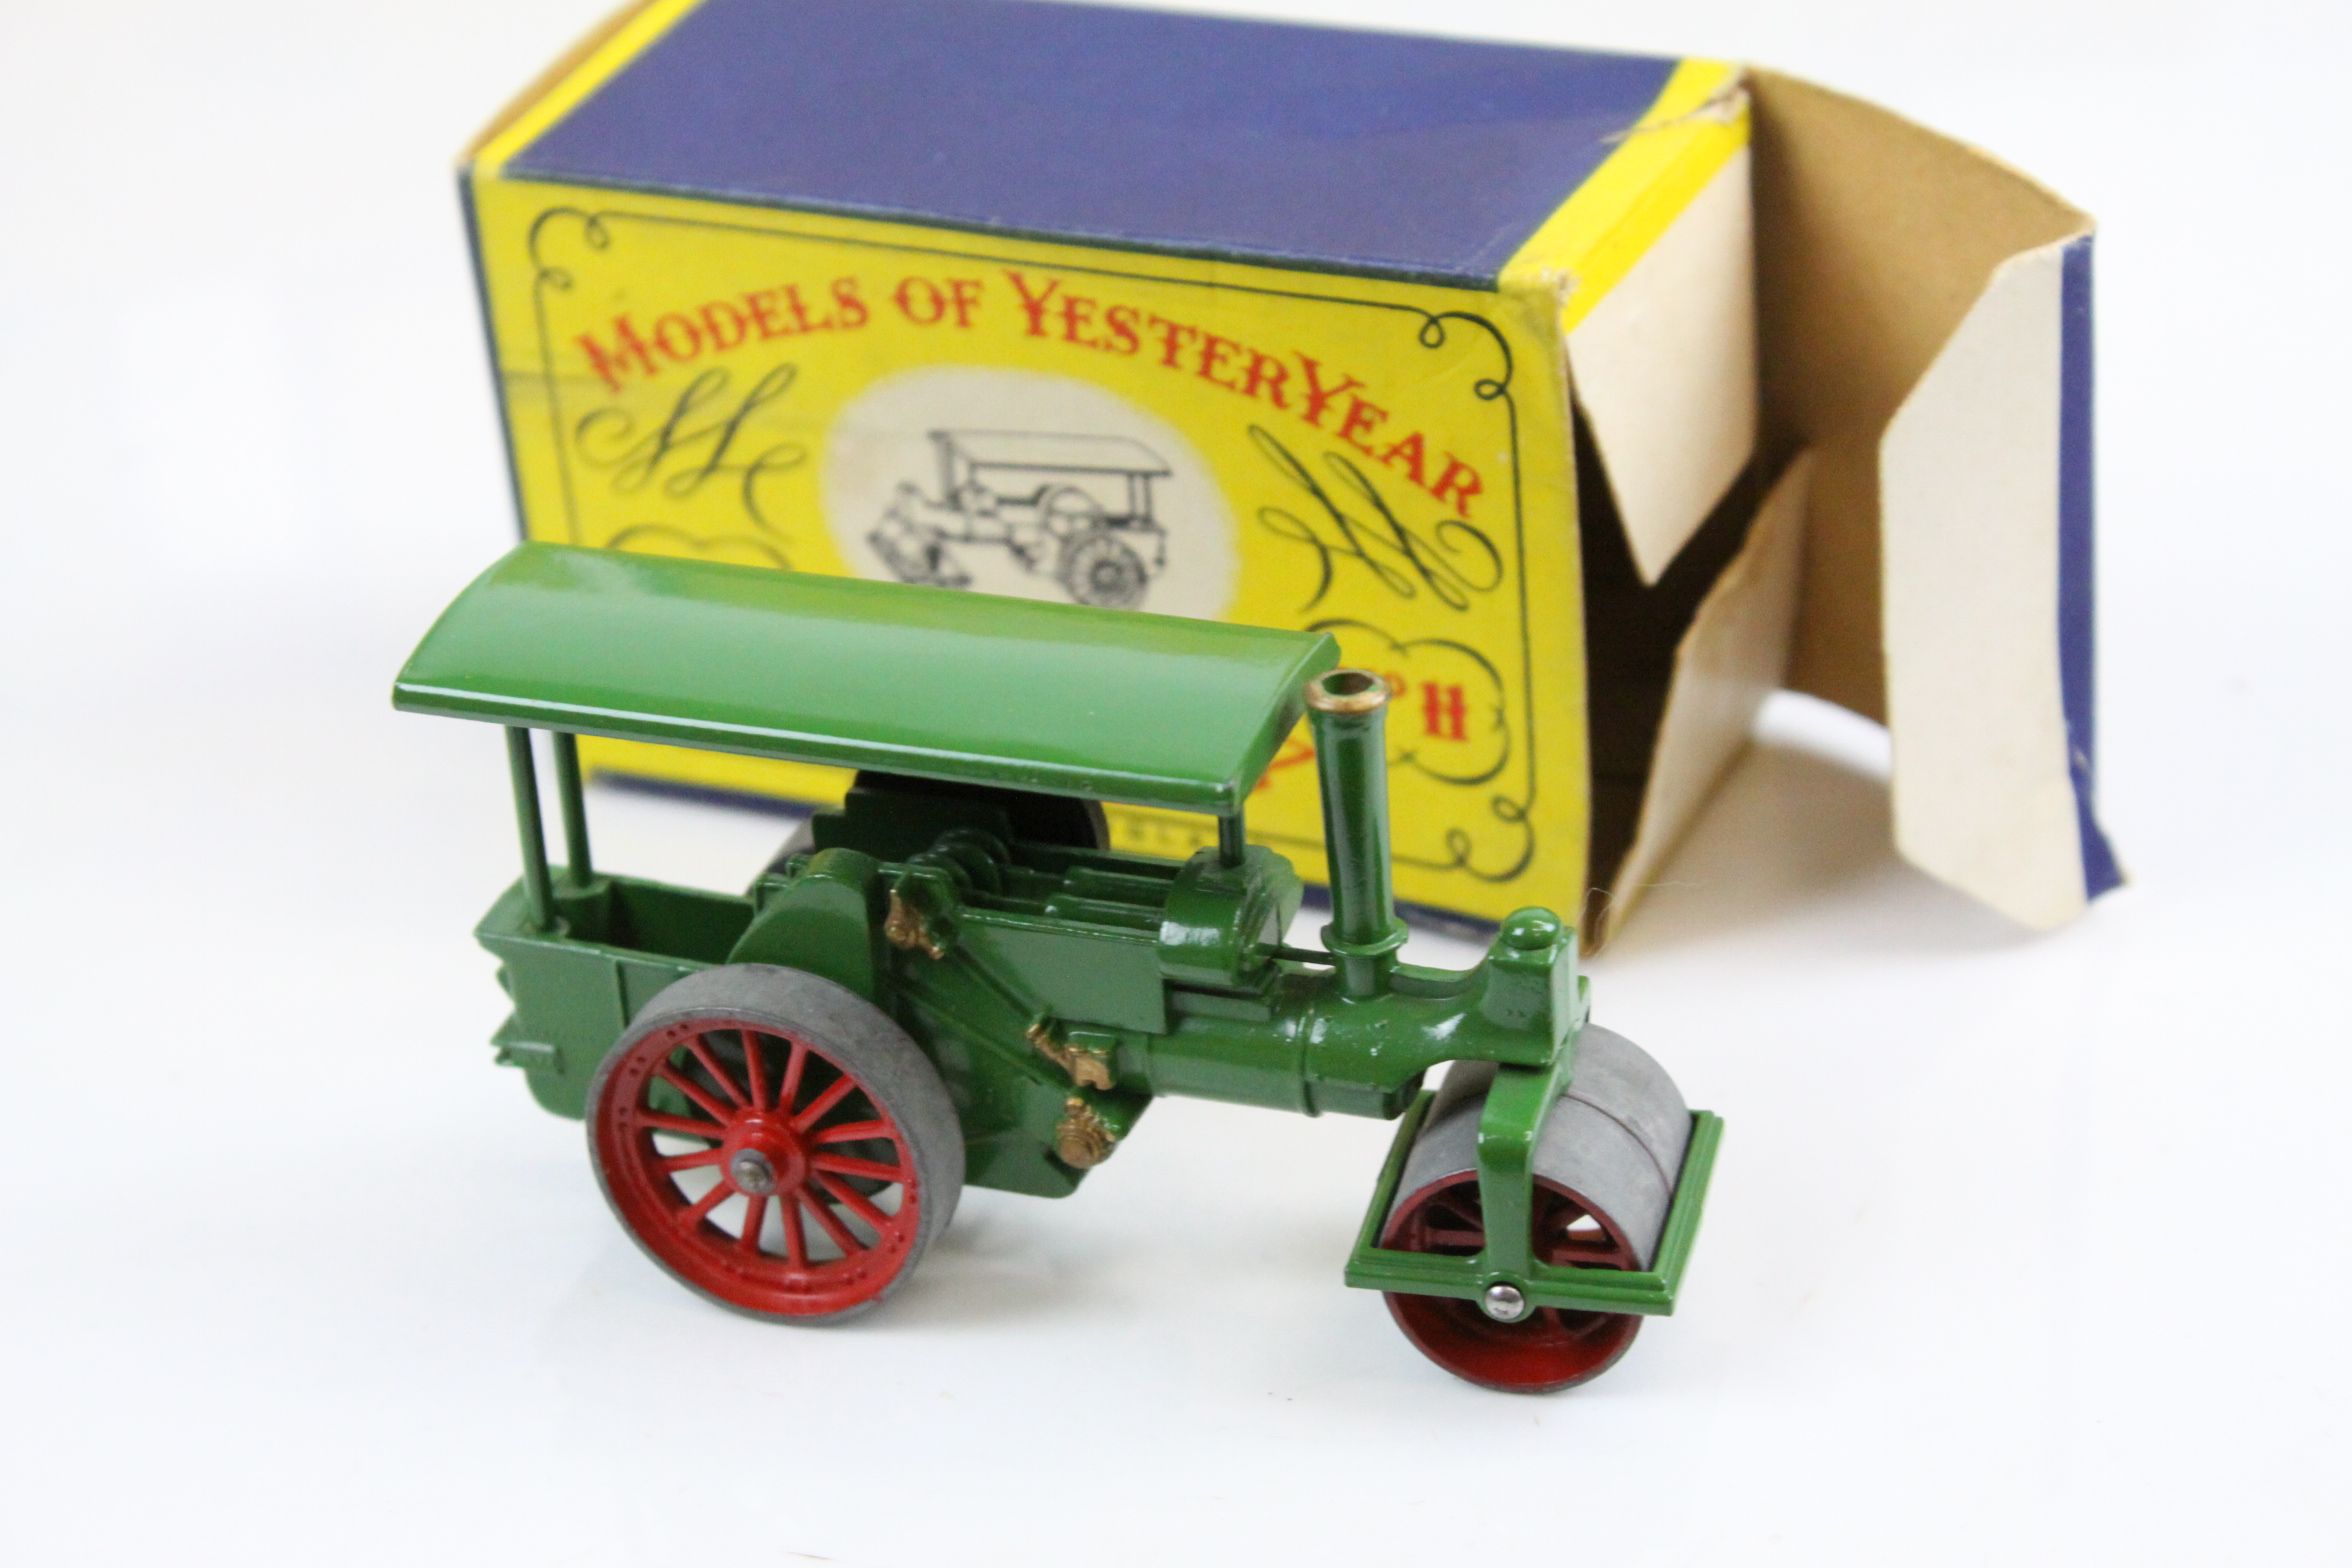 18 boxed diecast Matchbox Models Of YesterYear to include no.1 Allchin Traction Engine, no.2 B - Image 7 of 19